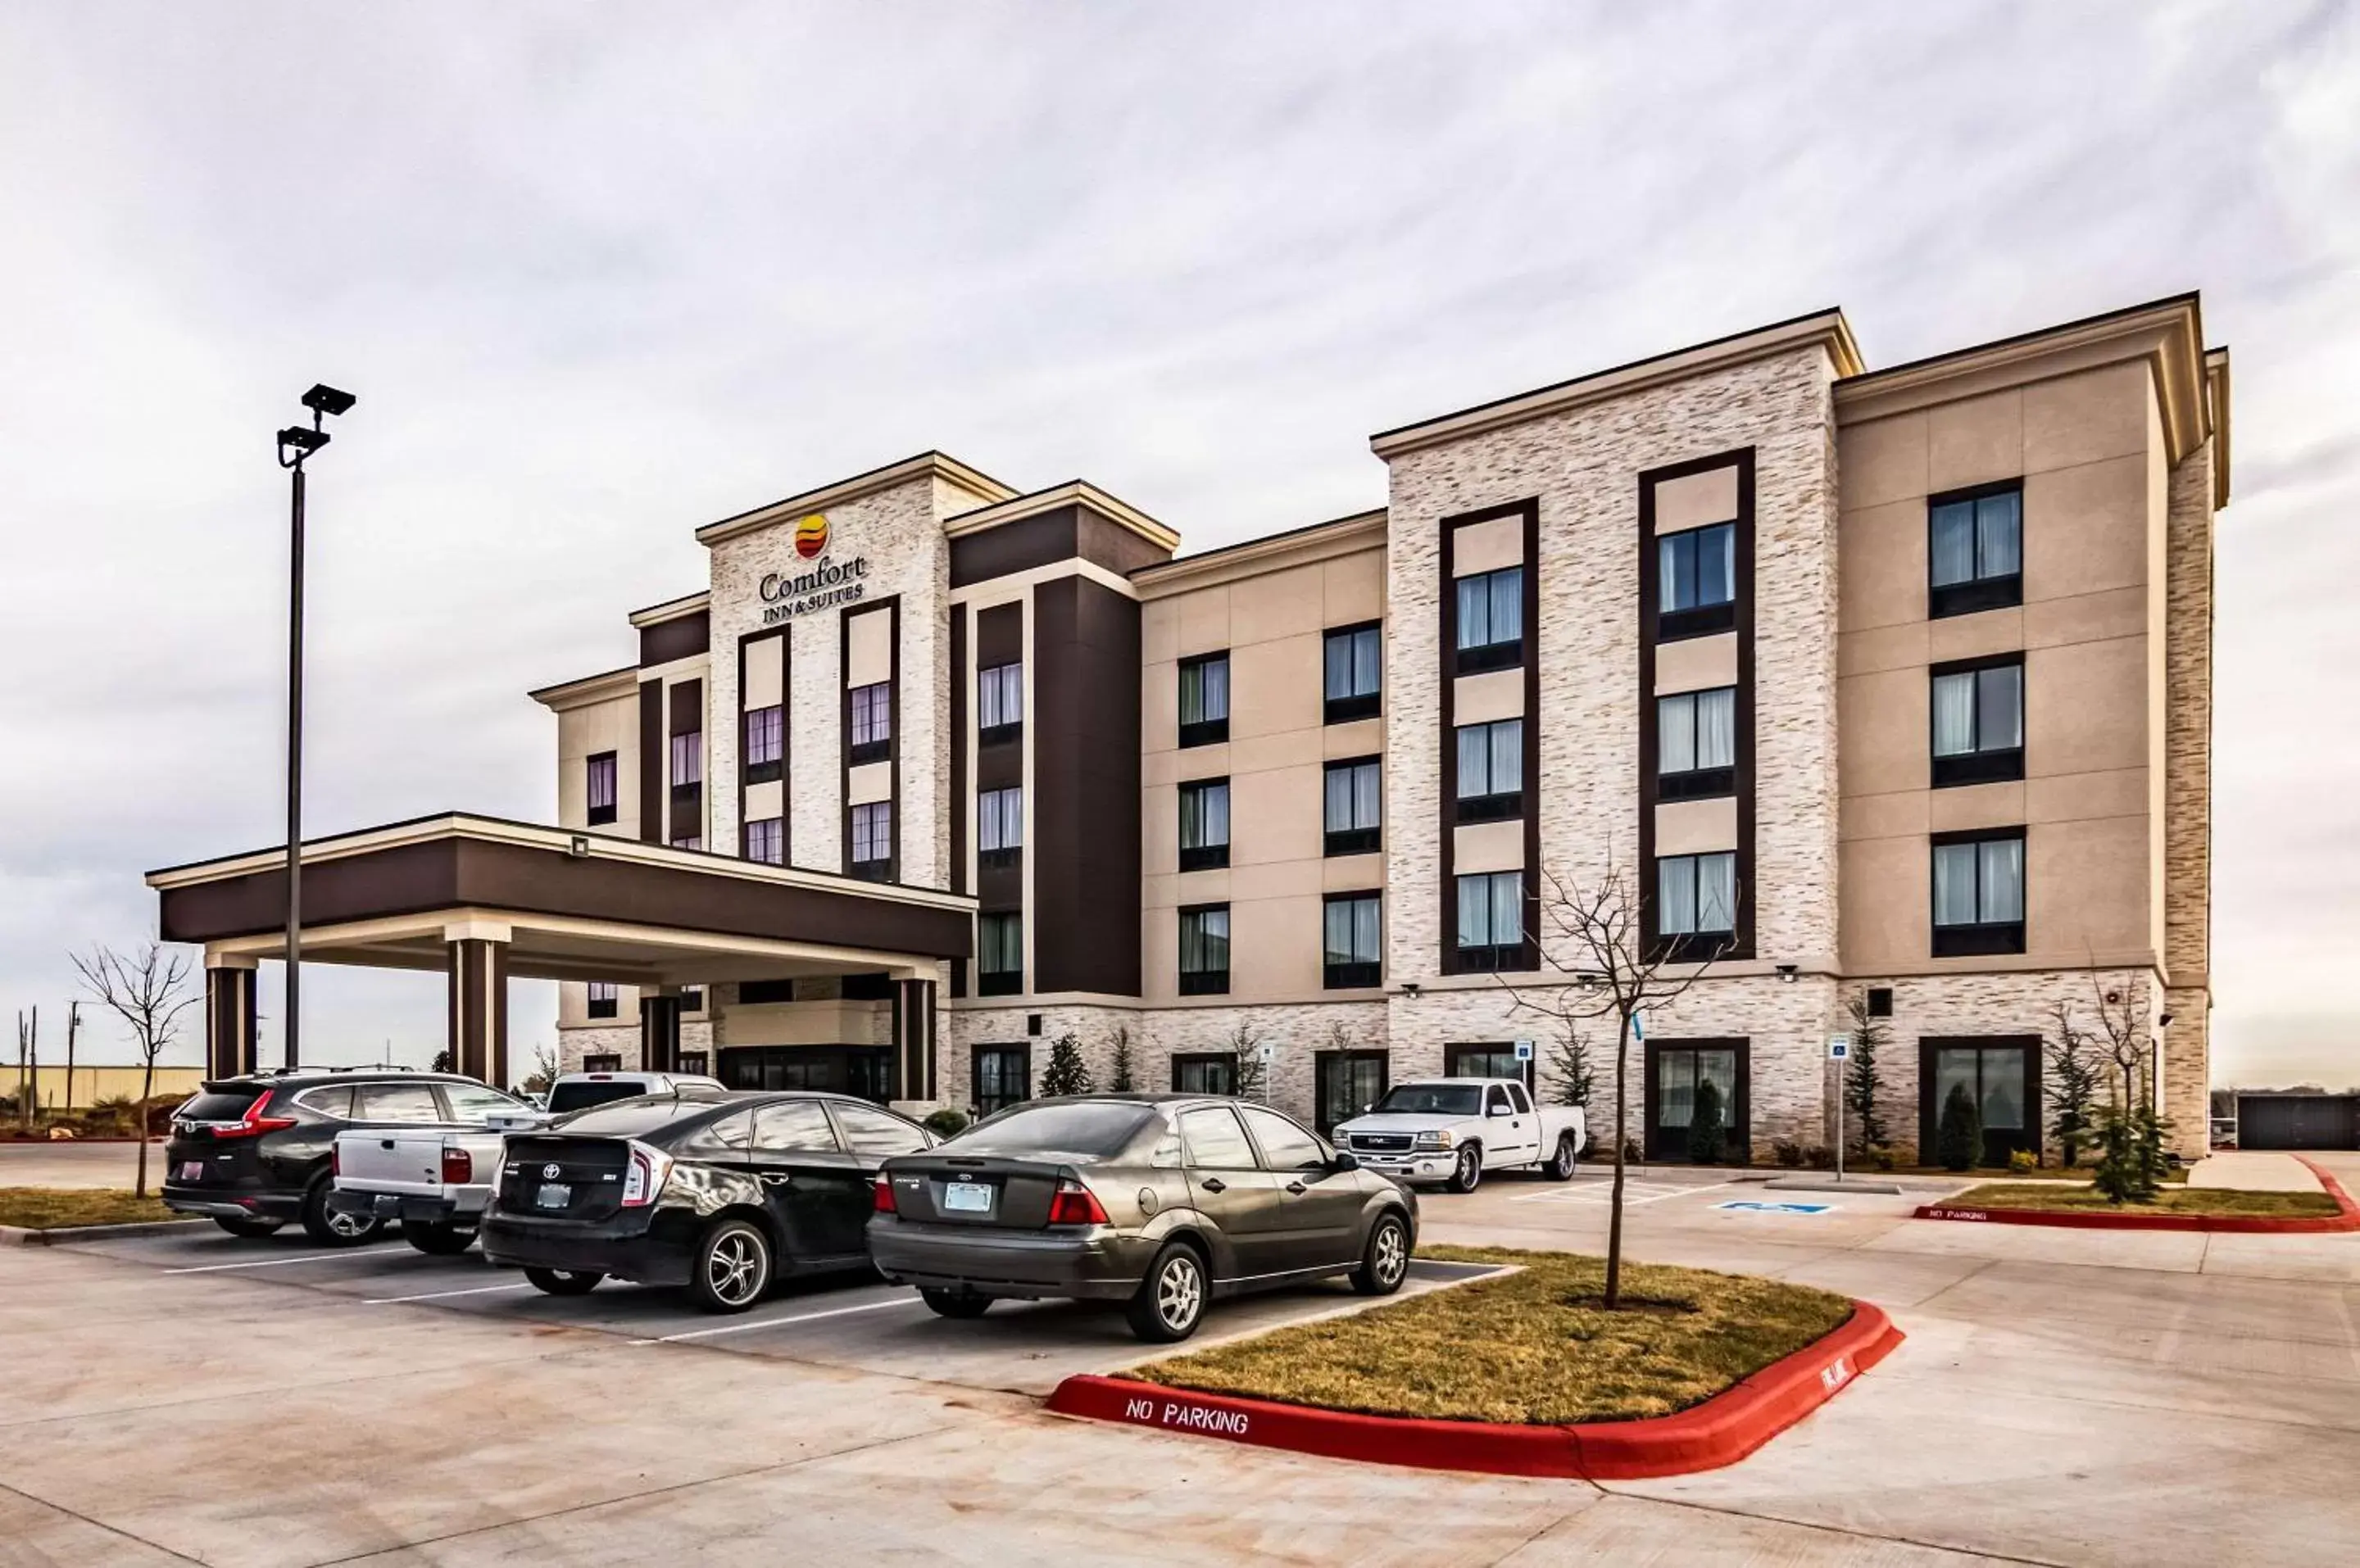 Property Building in Comfort Inn & Suites Oklahoma City